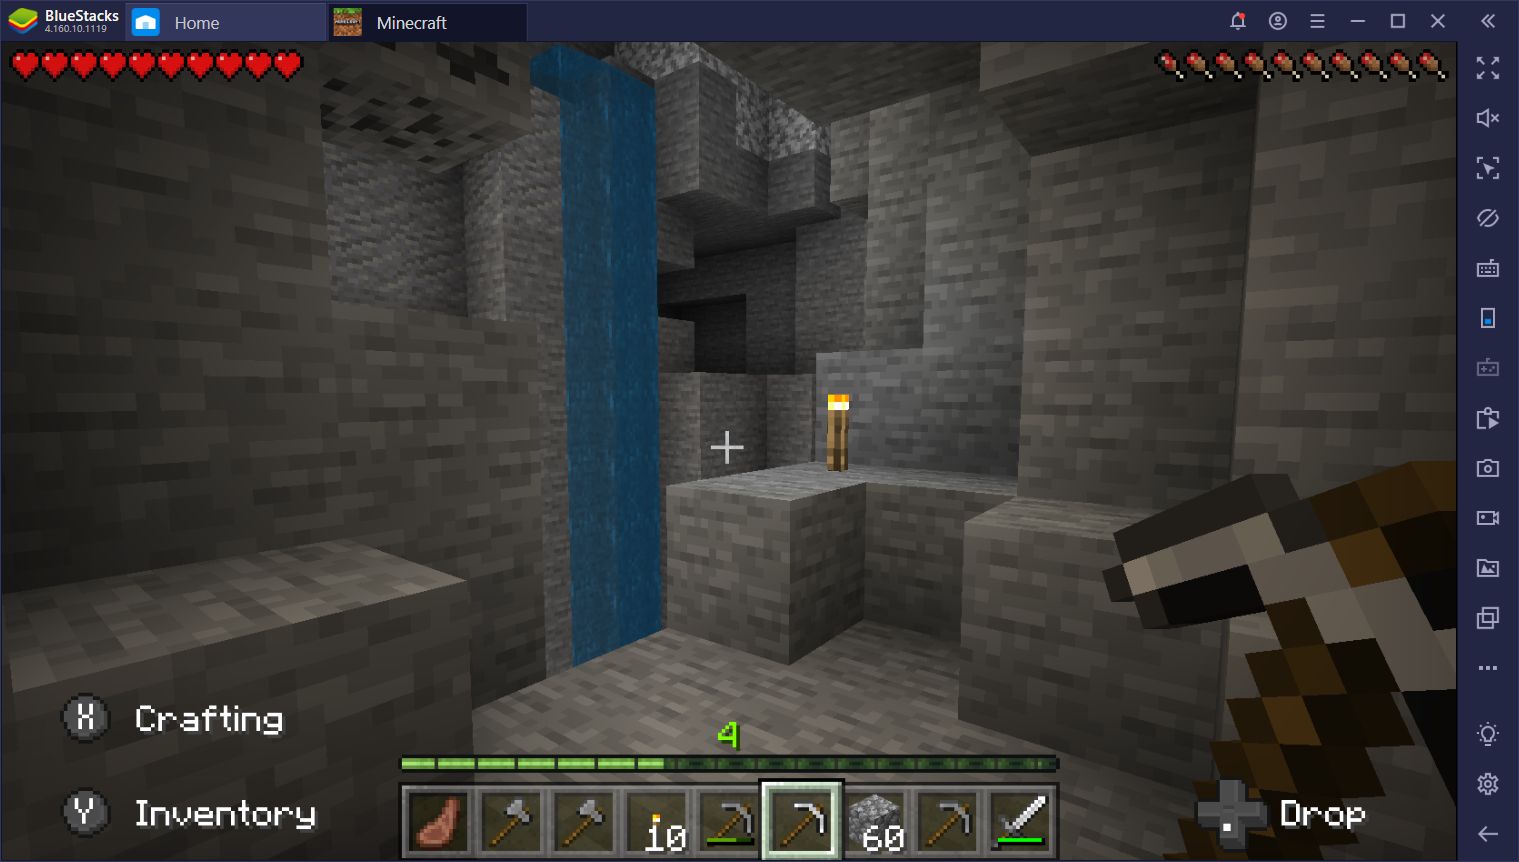 Mining in Minecraft - How to Gather Materials and Stay Safe in the Process